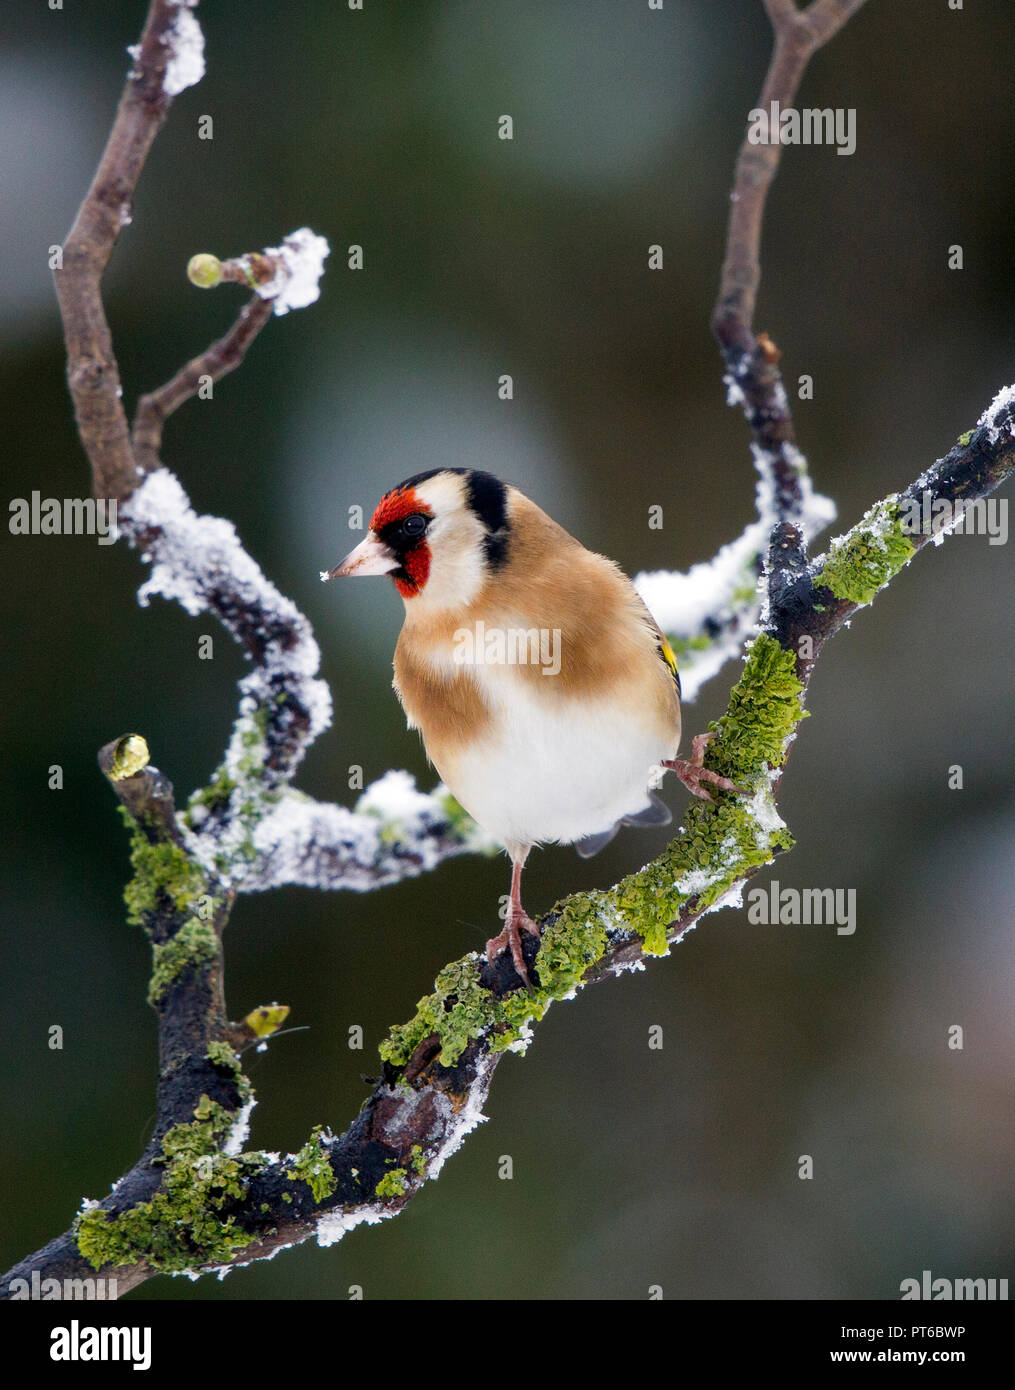 Goldfinch, Carduelis carduelis,on a snow covered branch in winter (revised image) Stock Photo